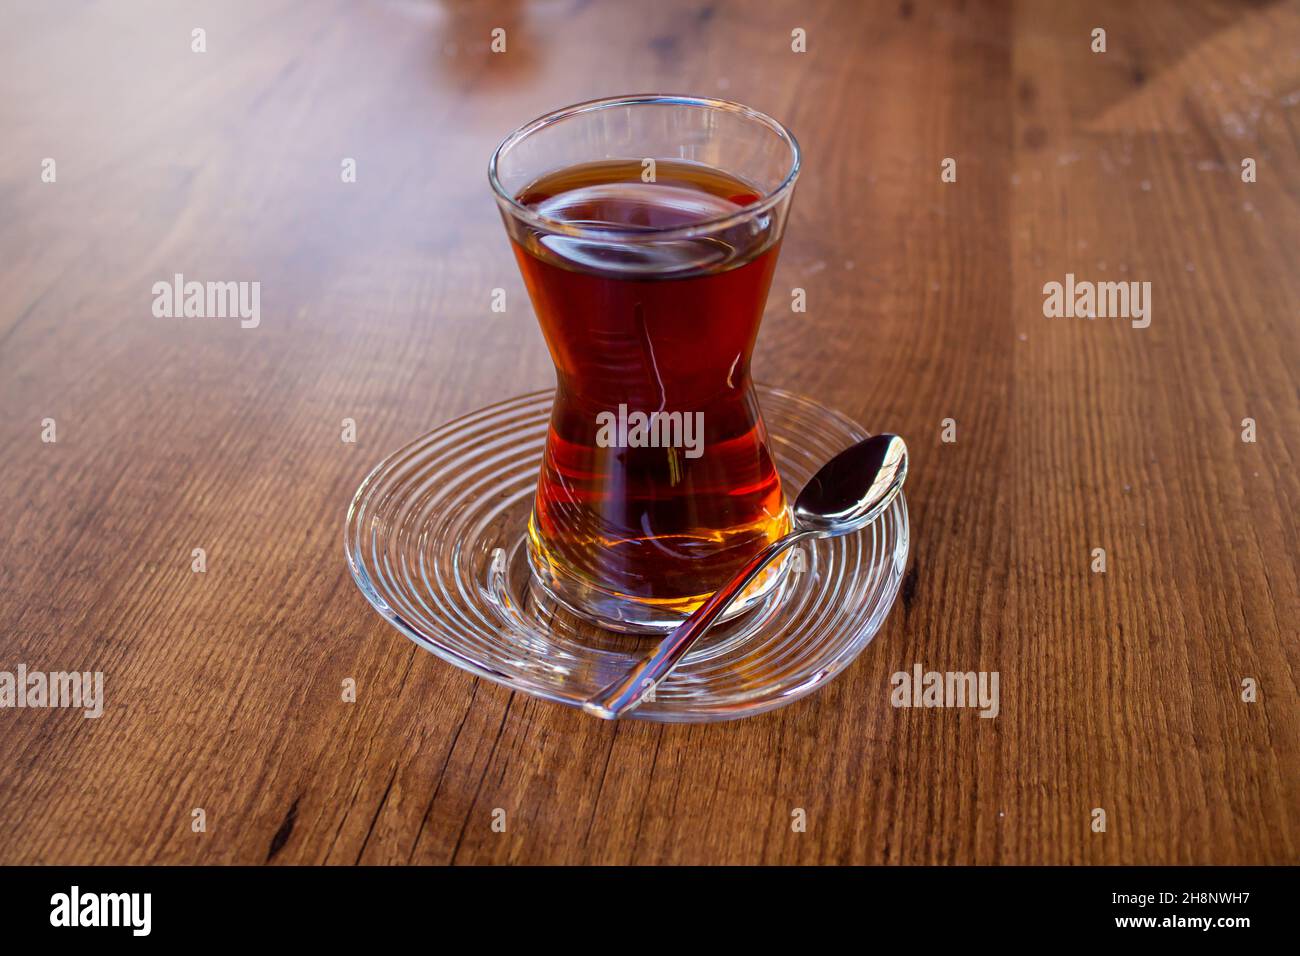 Turkish tea in glass, traditional Turkish tea on wooden table in a cafe. Stock Photo